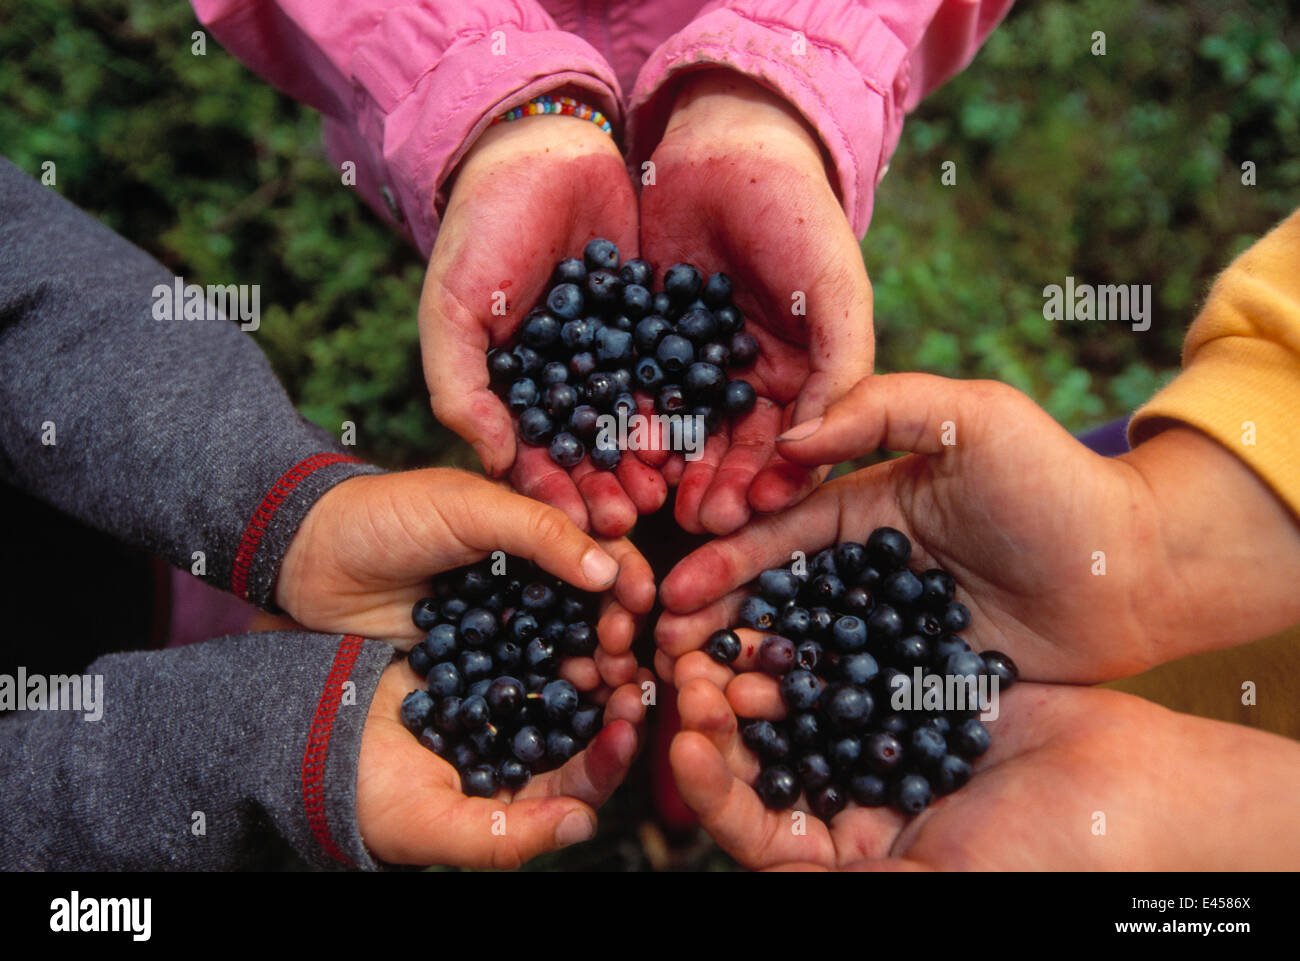 Hands holding harvested Blueberries {Vaccinium sp} Sweden. Stock Photo